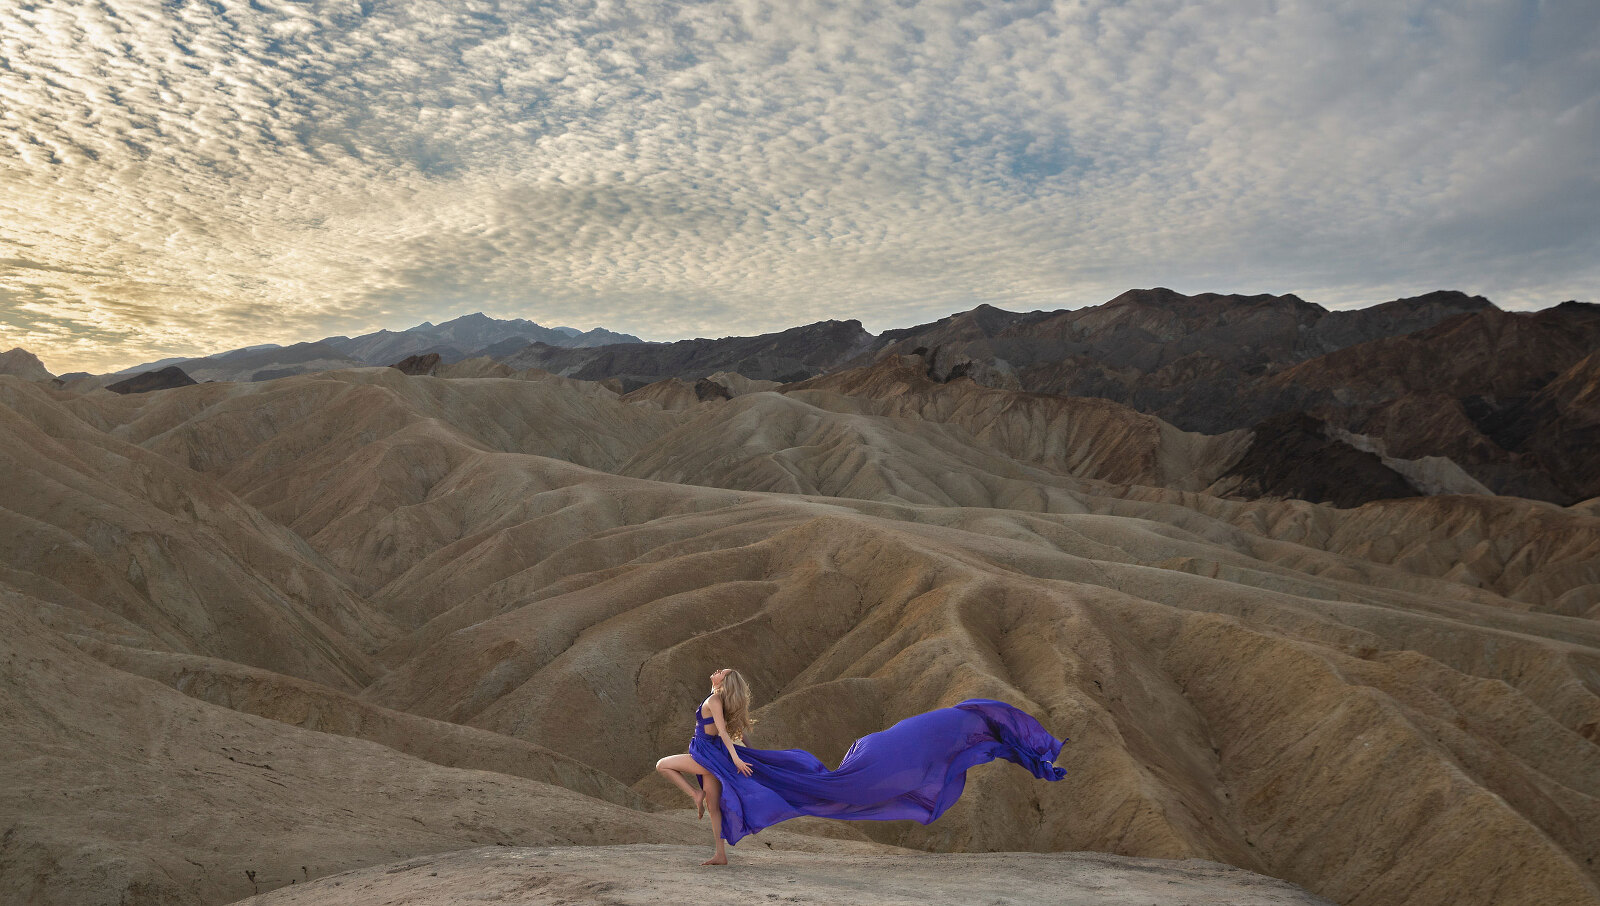 Woman in a long, purple dress with badlands and clouds.